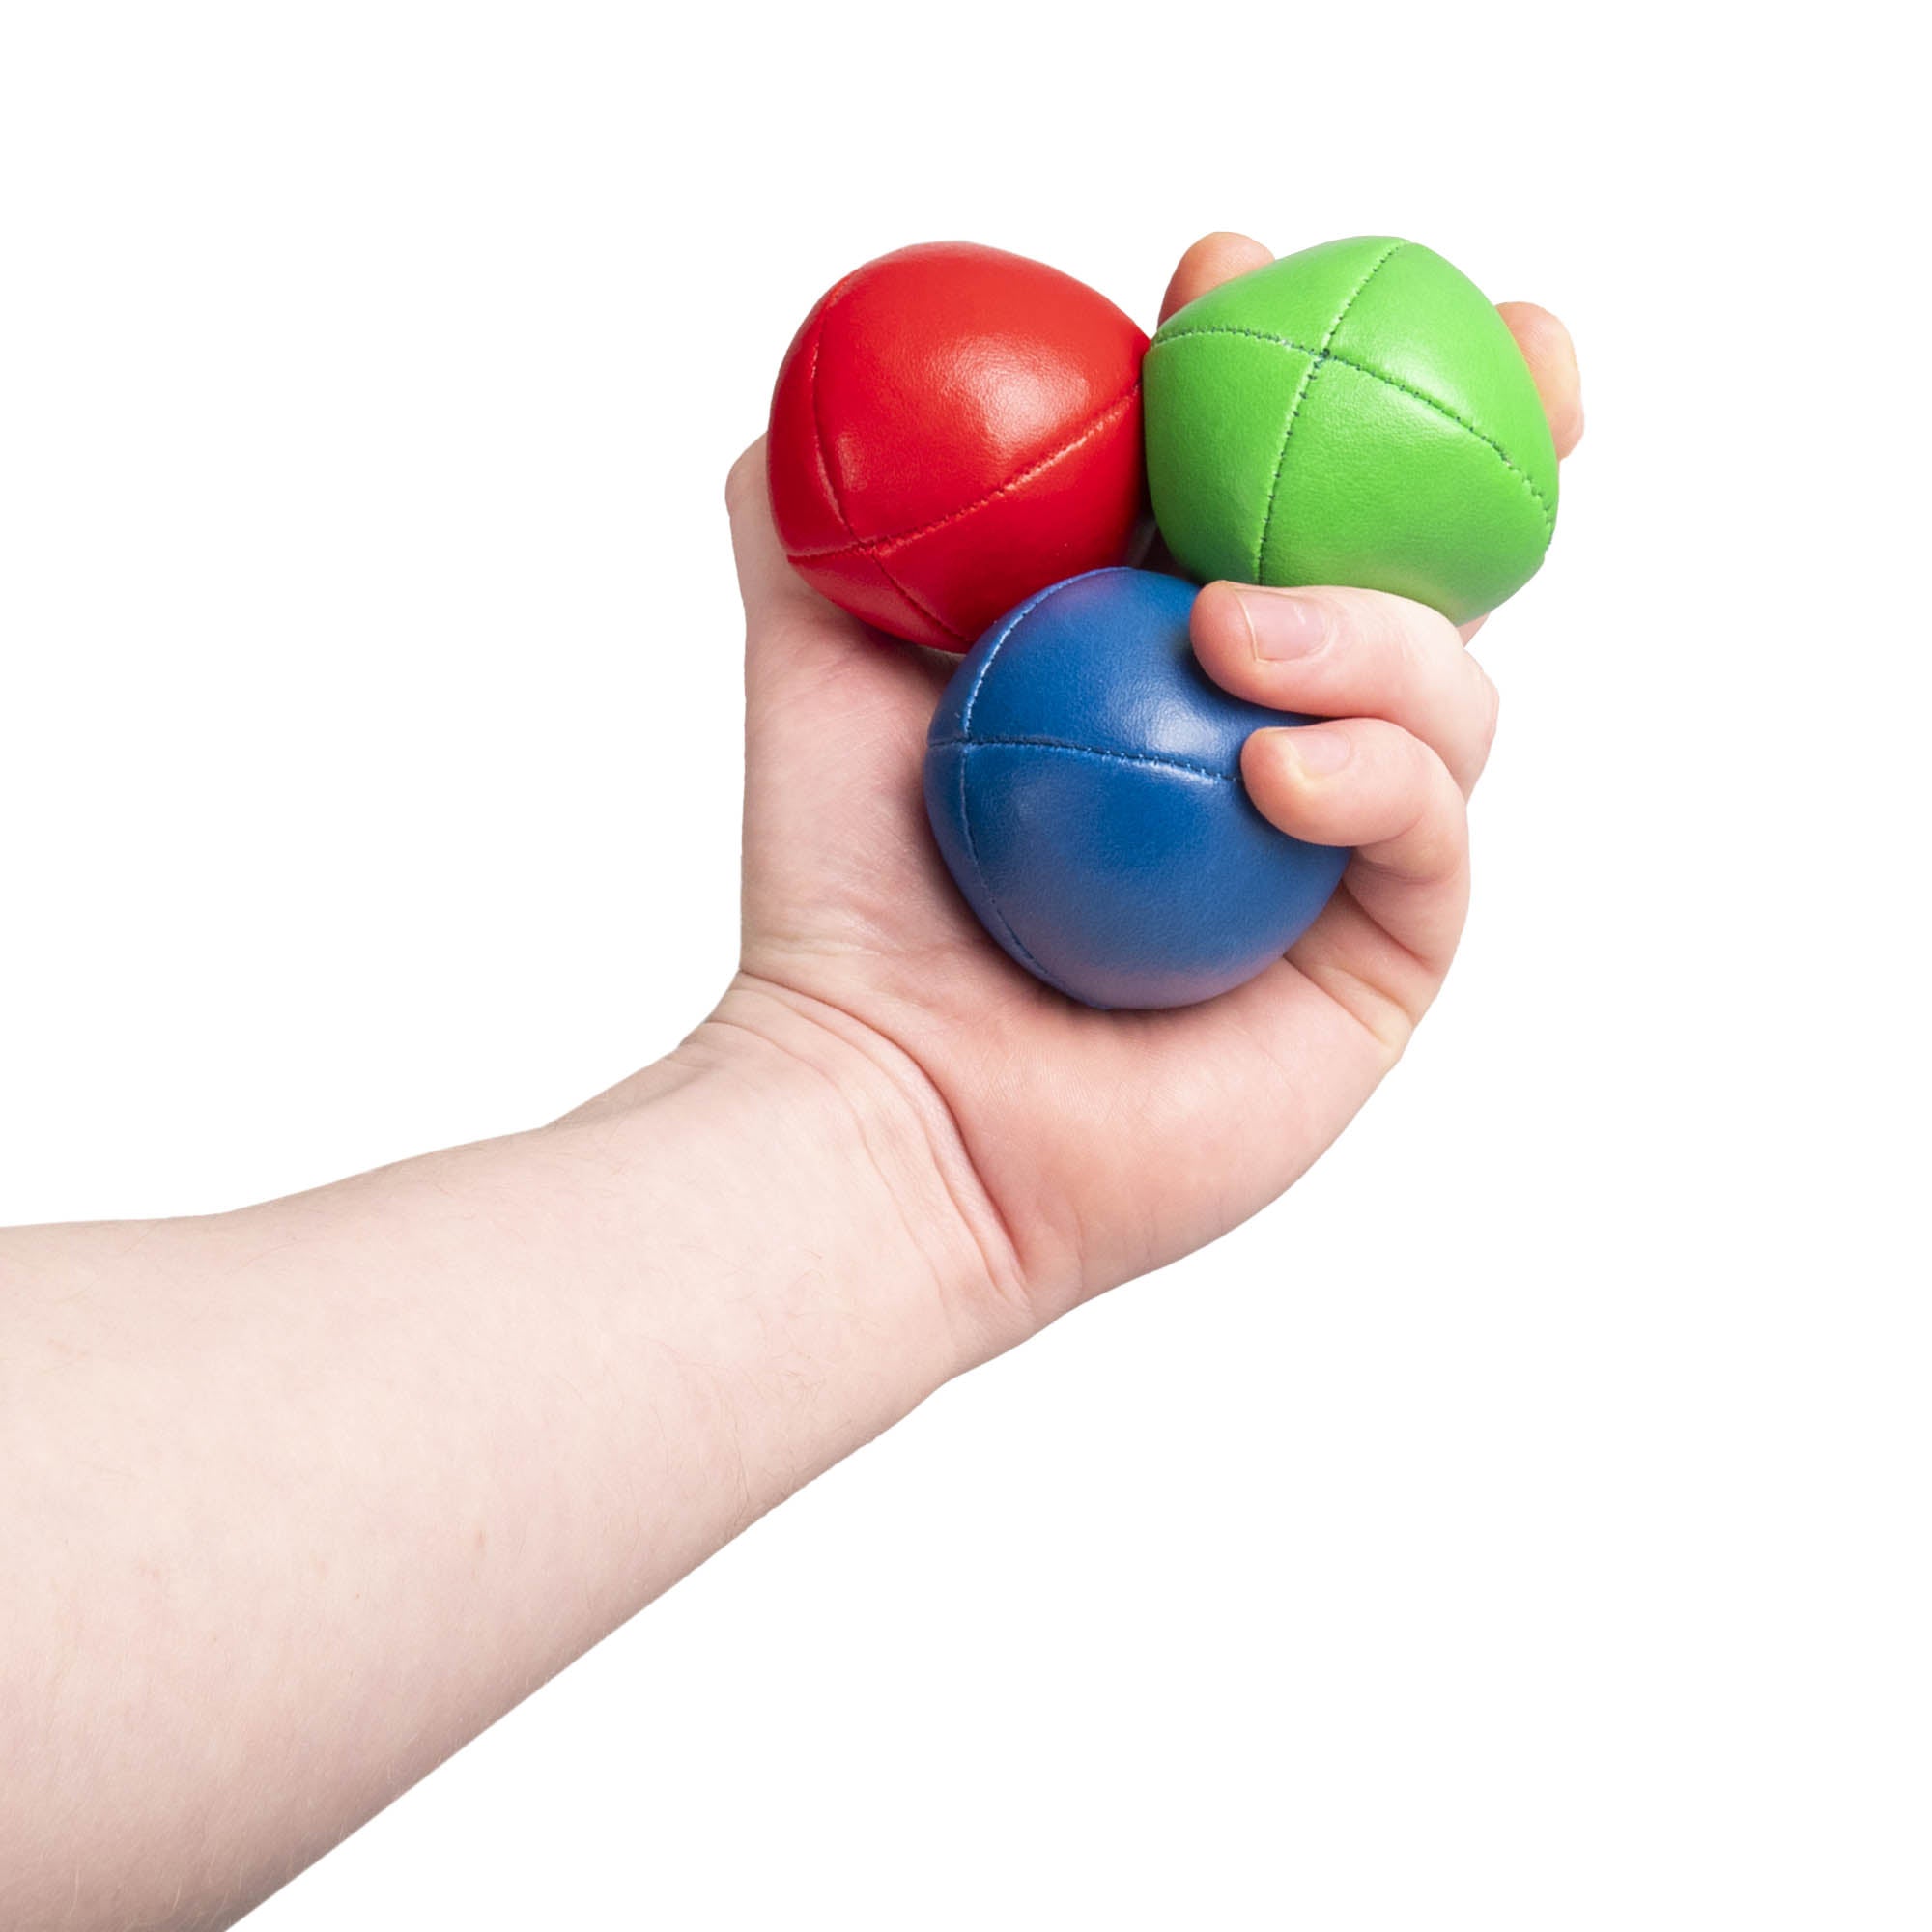 3 different colour balls in hand